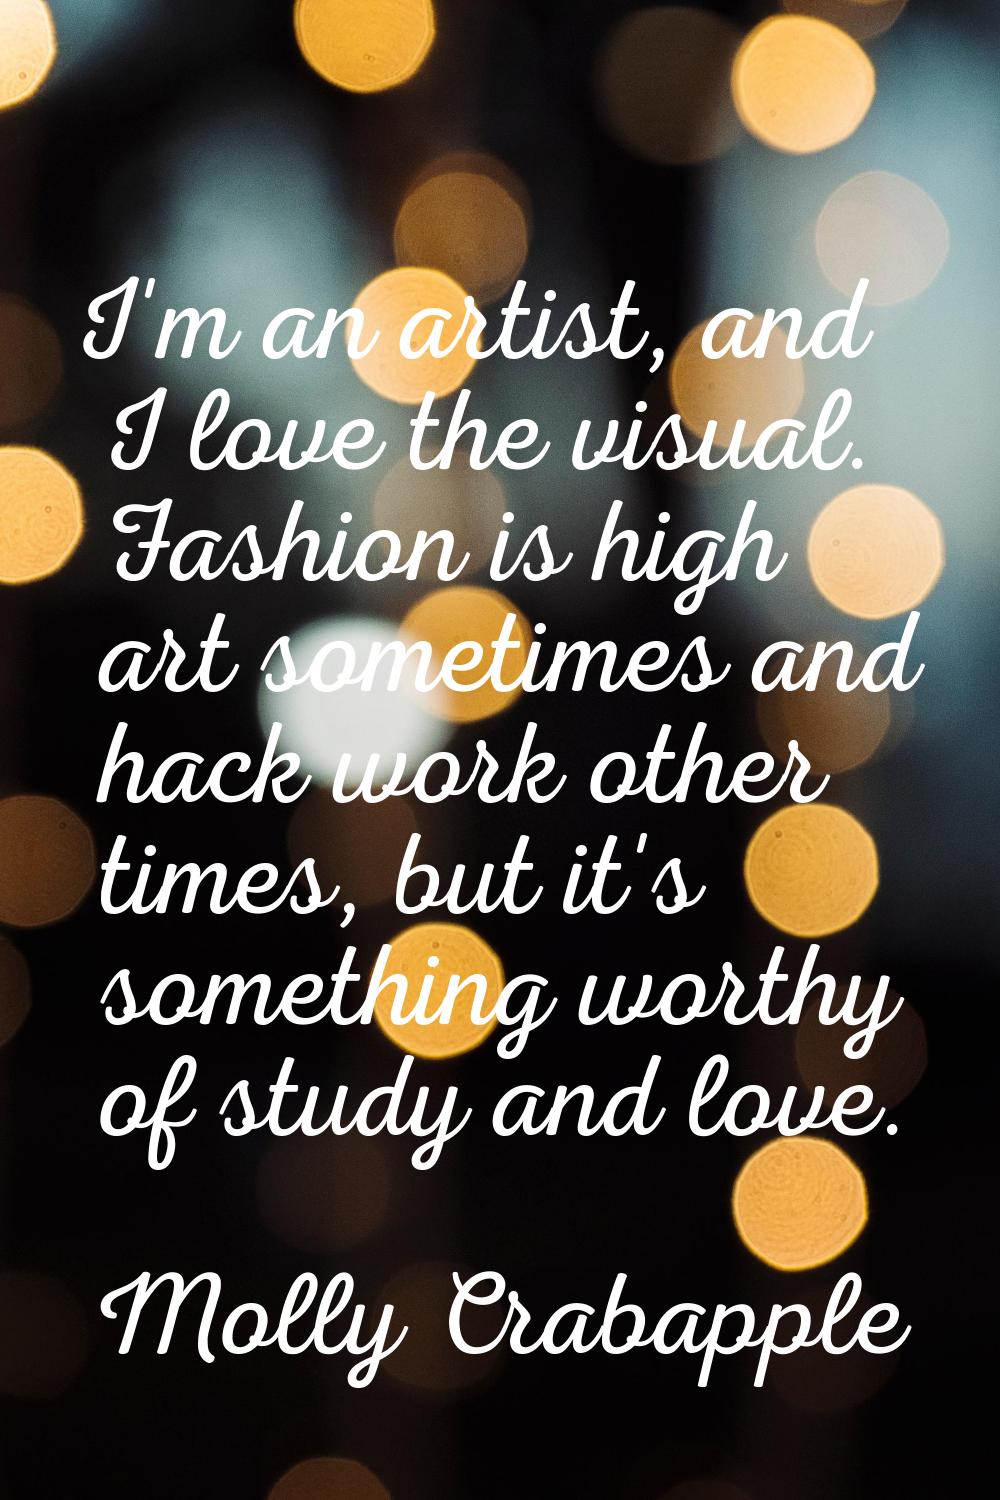 I'm an artist, and I love the visual. Fashion is high art sometimes and hack work other times, but 